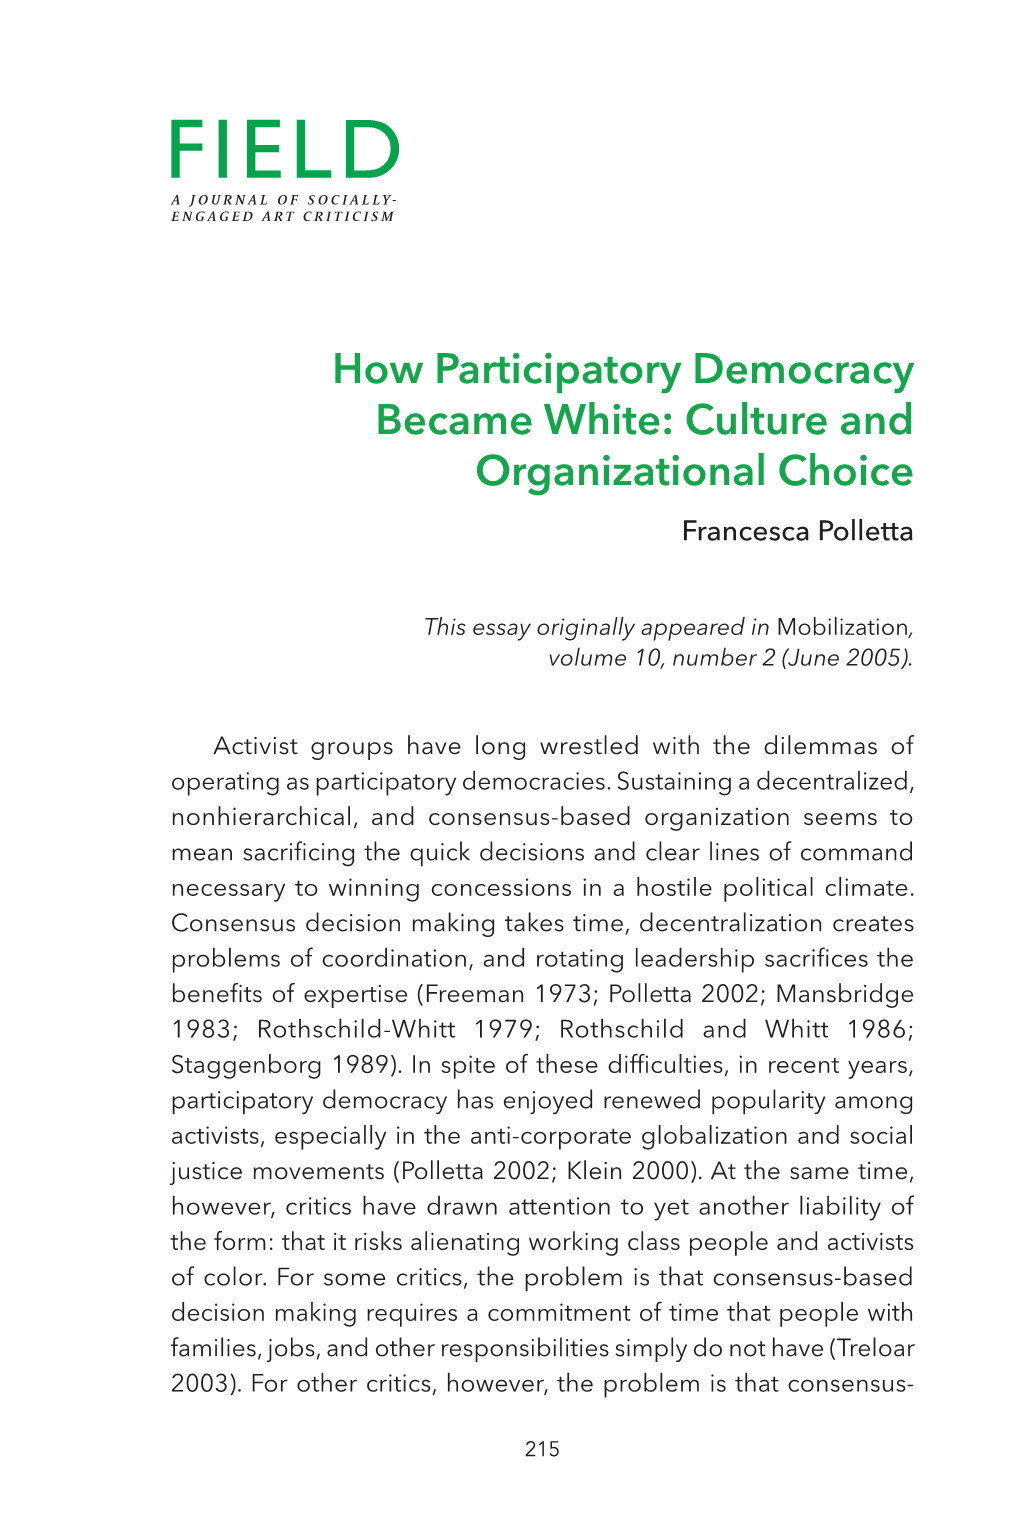 How Participatory Democracy Became White: Culture and Organizational Choice Francesca Polletta